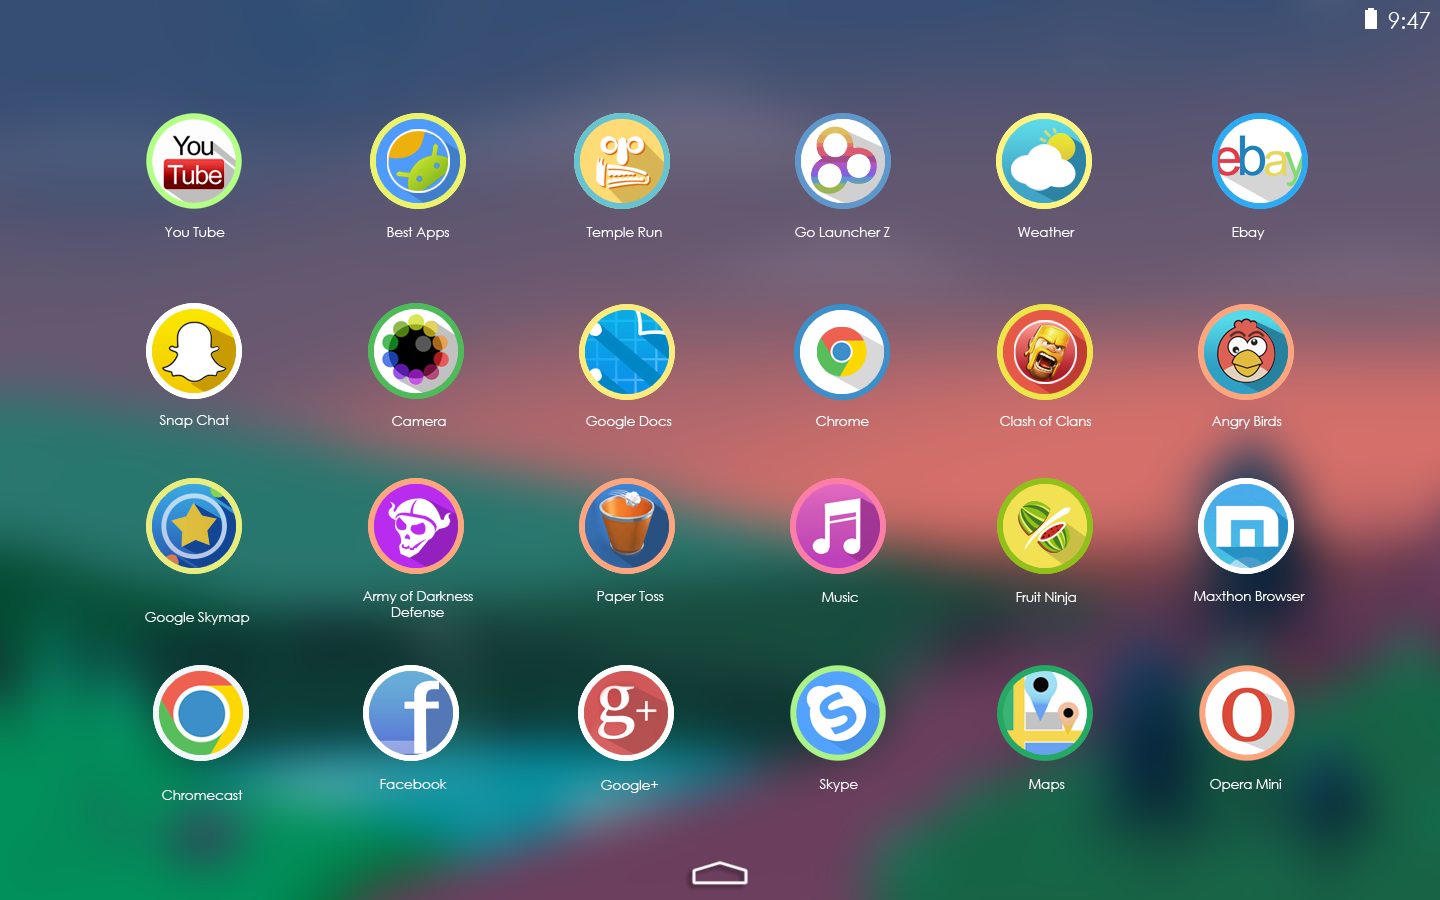 20 Best Free Icon Packs to Customize Your Android